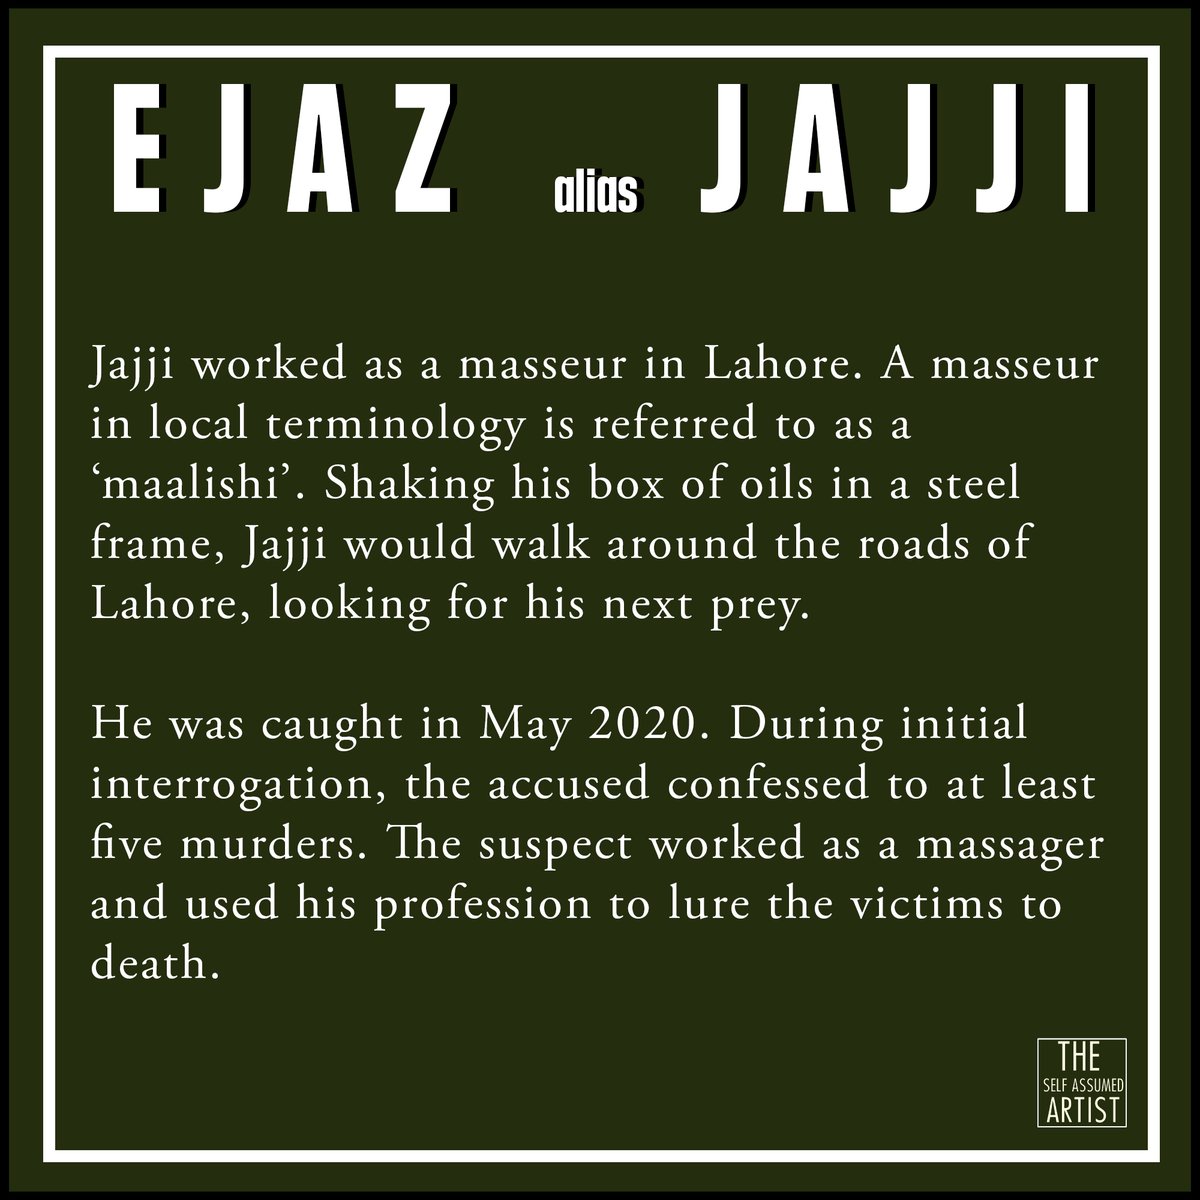 Ejaz alias Jajji, worked as a masseur in Lahore. He confessed to luring at least 5 people for a massage and robbing them before committing the murders.